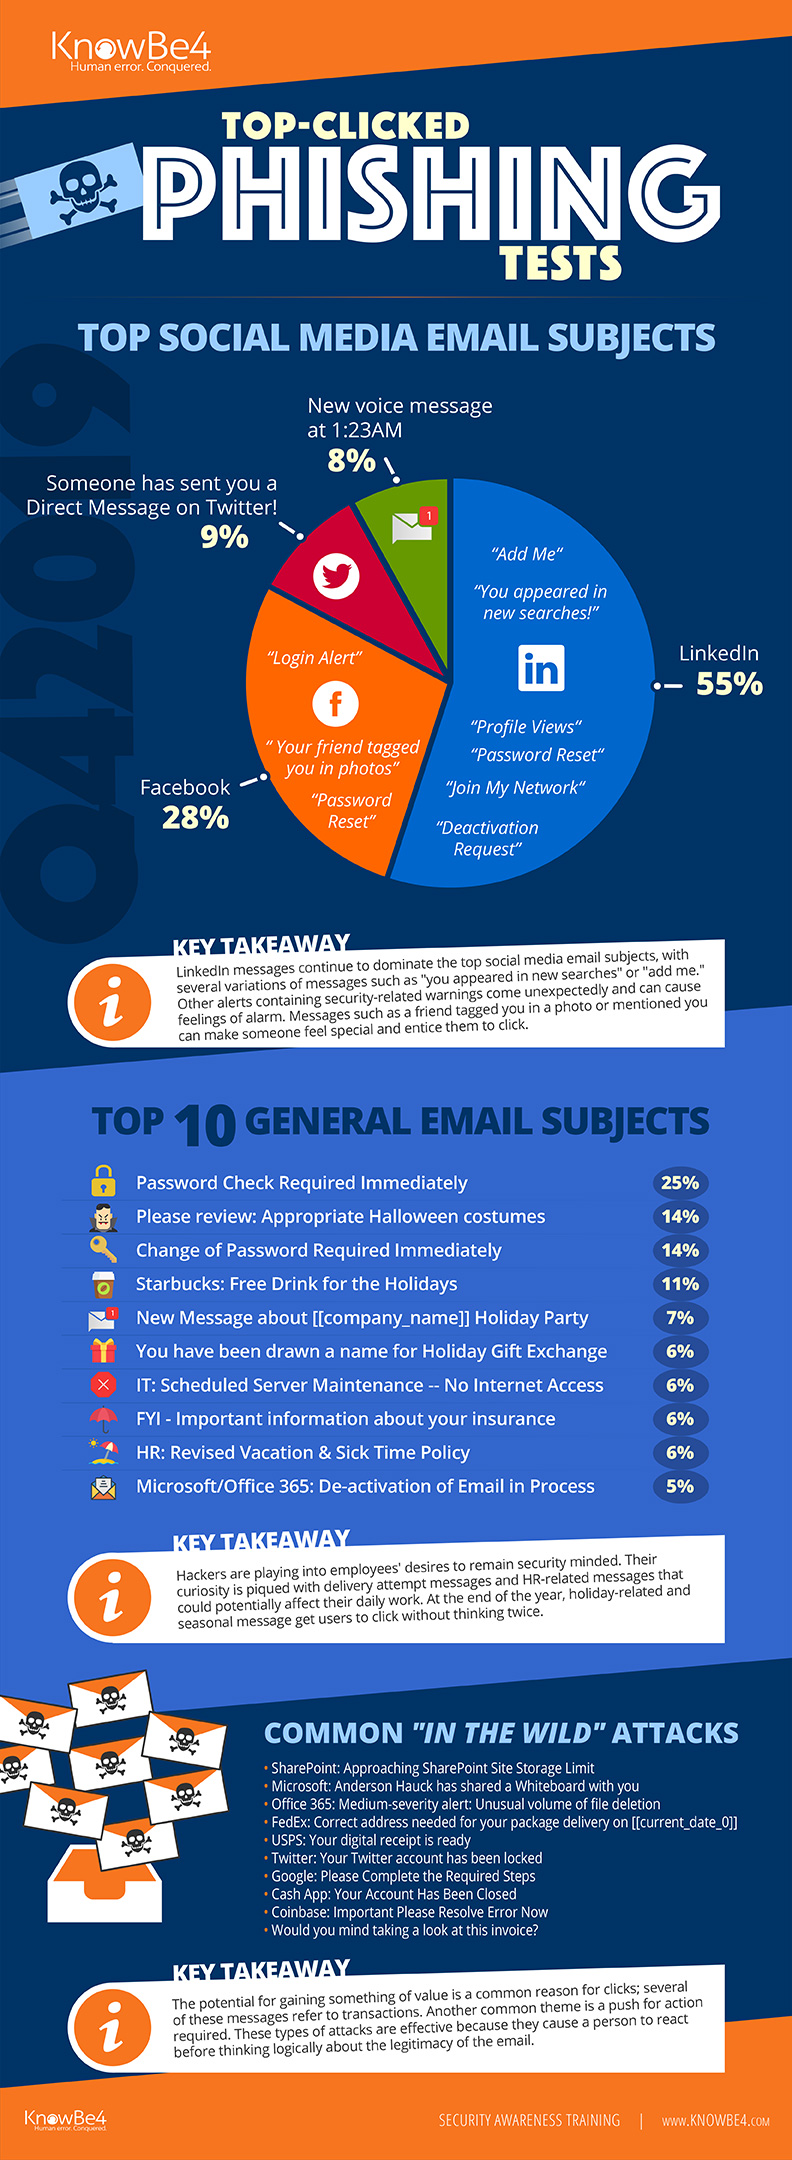 Q4 2019 KnowBe4 Finds Security-Related and Giveaway Phishing Email Subject Lines Get the Most Clicks